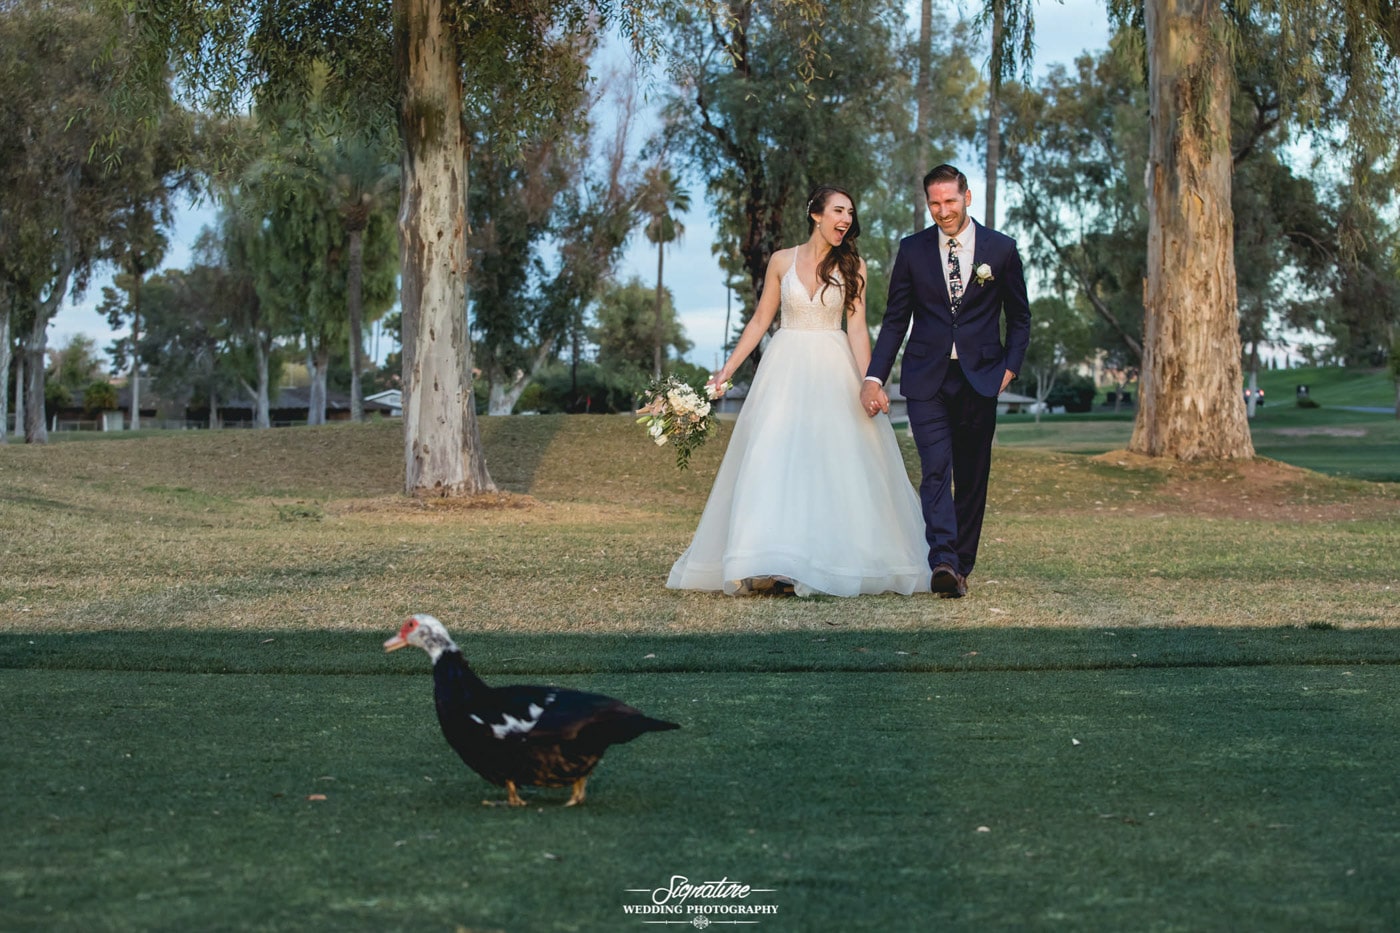 Bride and groom walking with duck